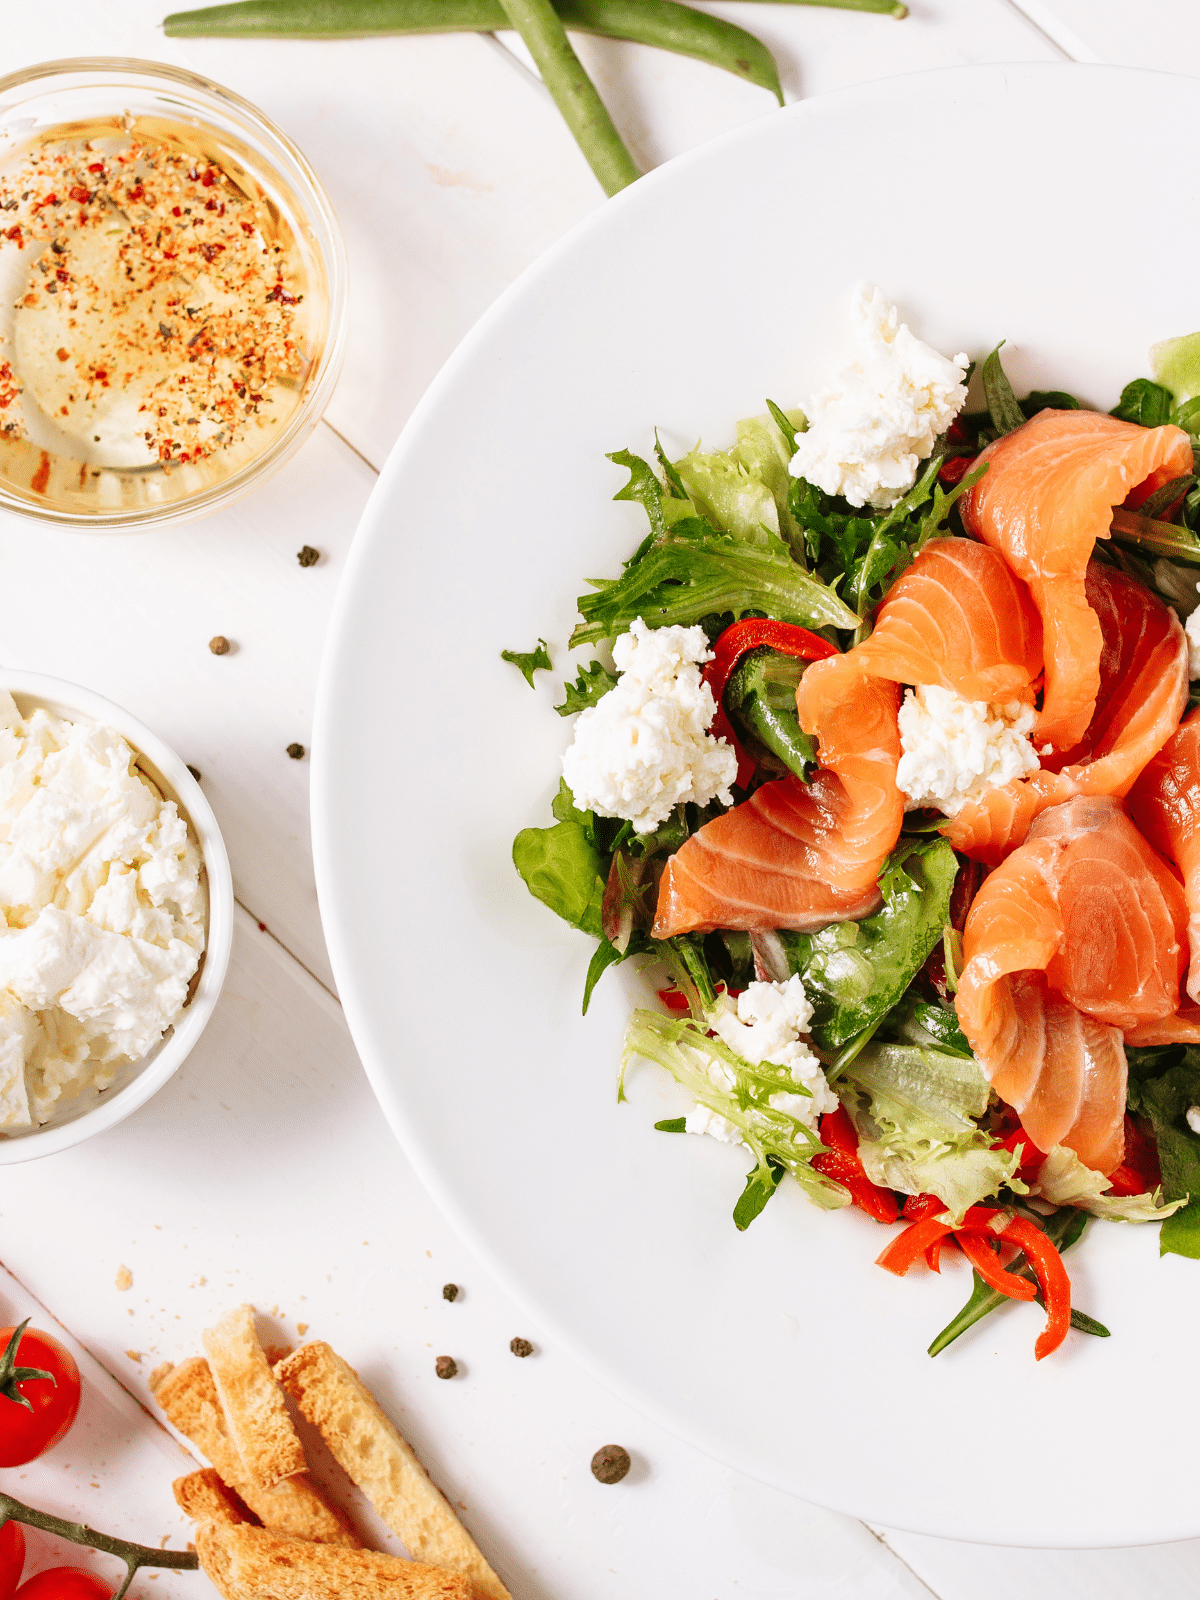 A plate of salmon salad with ricotta cheese.